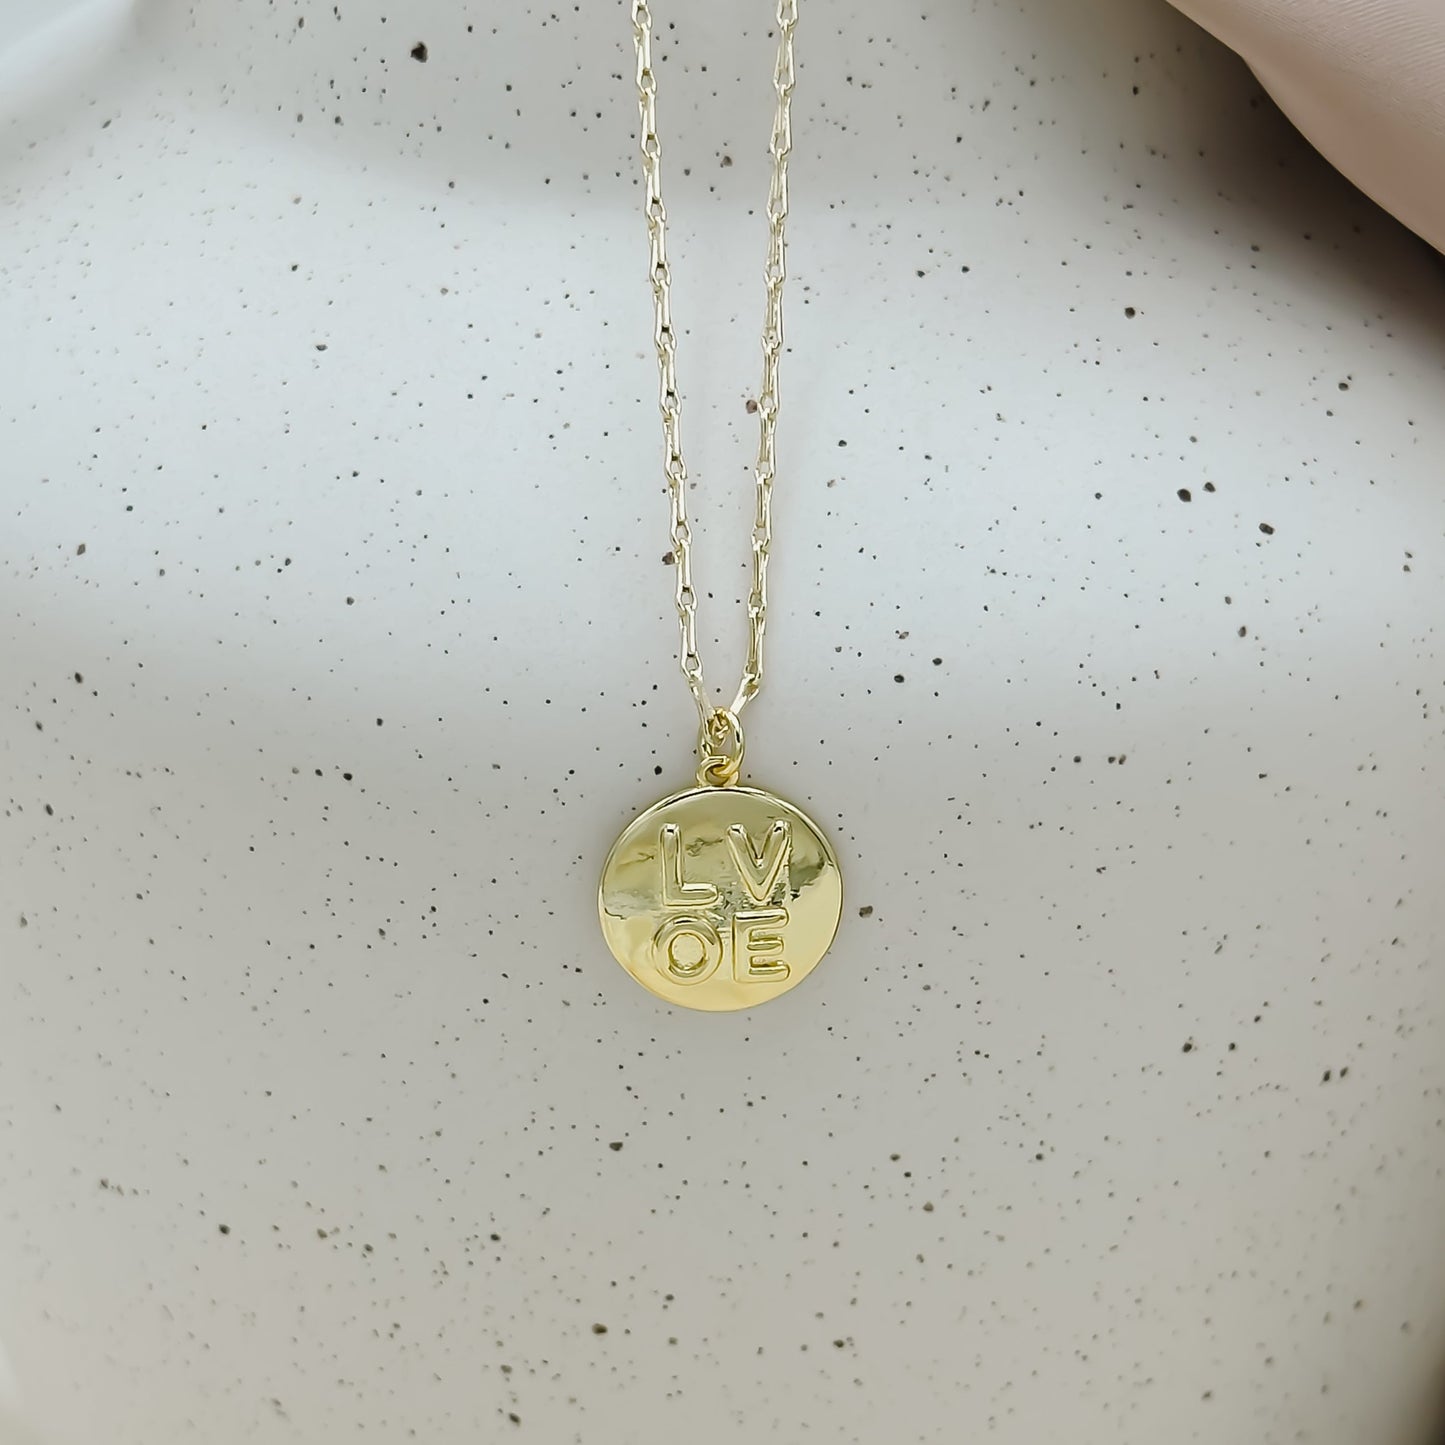 Love Coin Necklace